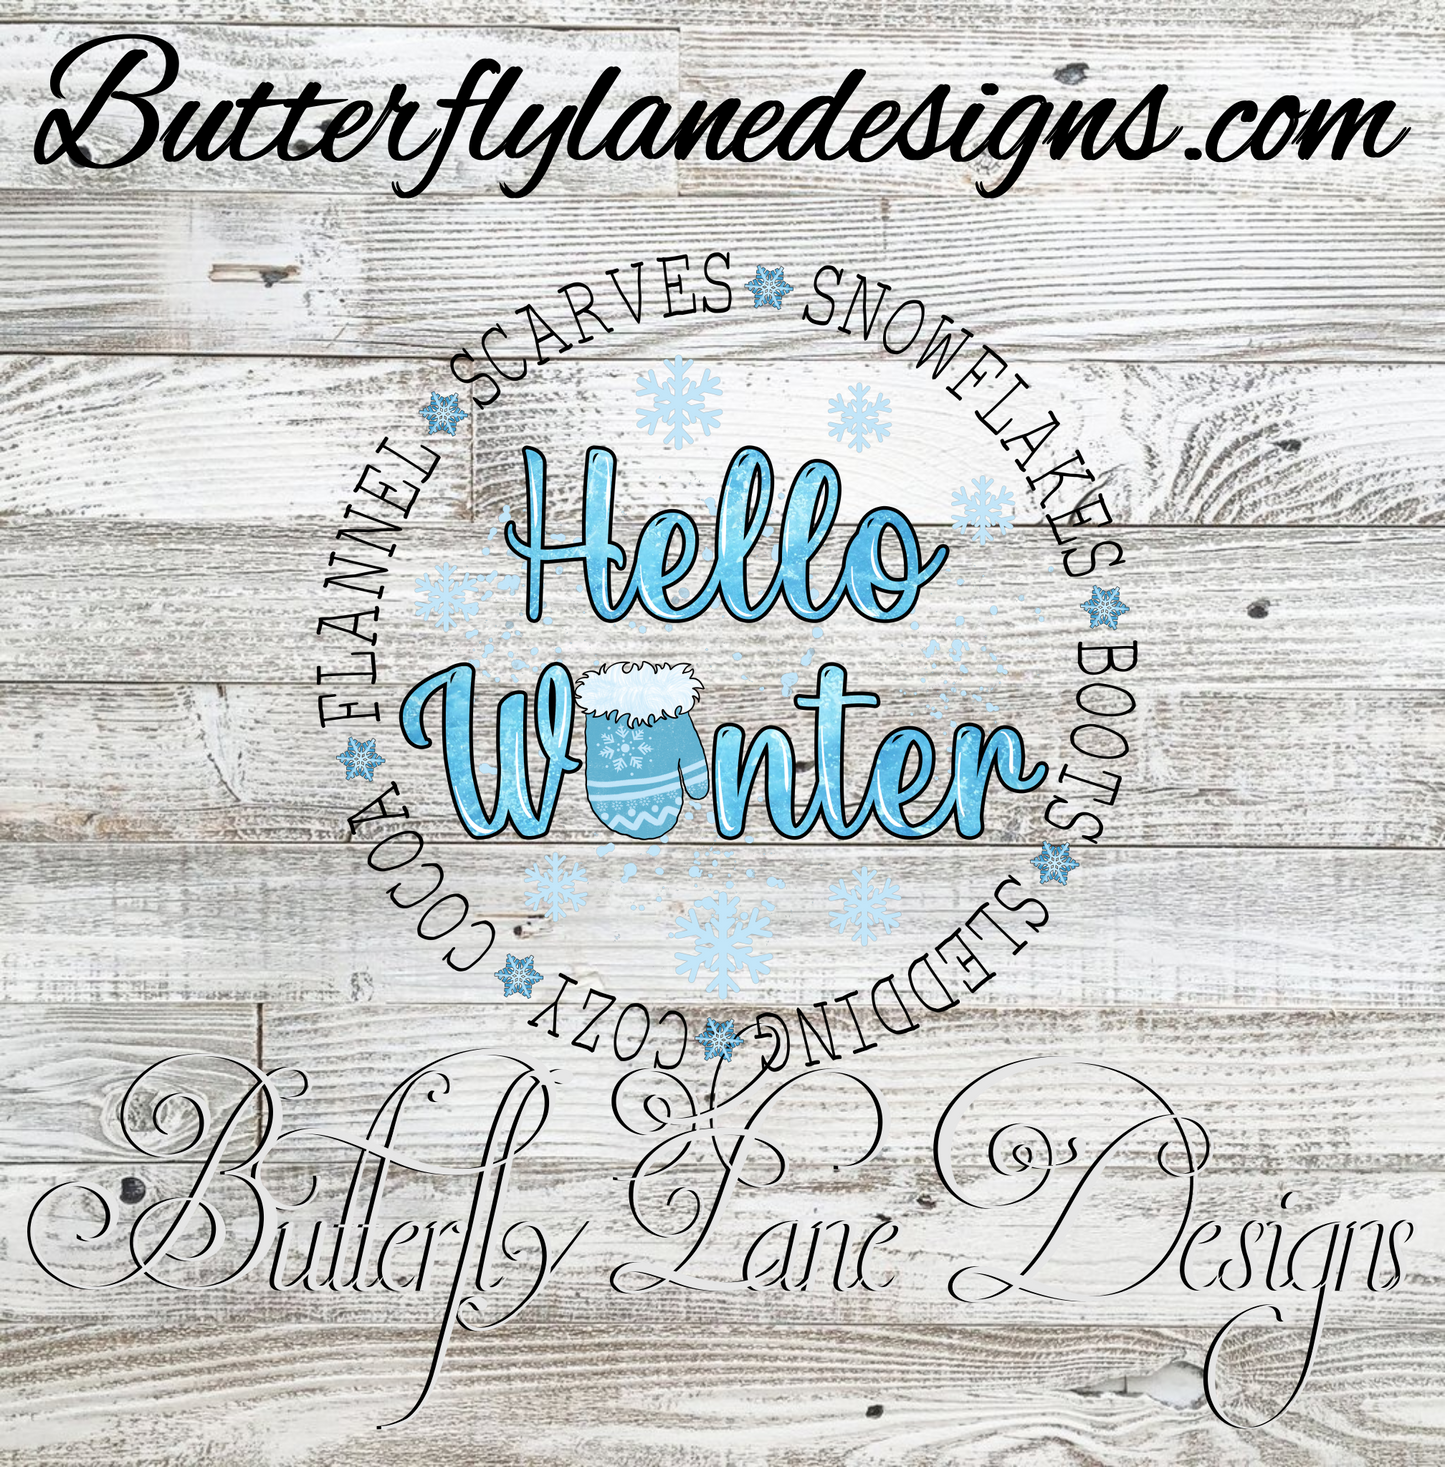 Hello Winter-03  sweaters, boots, mittens, hot coco ::  Clear Decal :: VC Decal